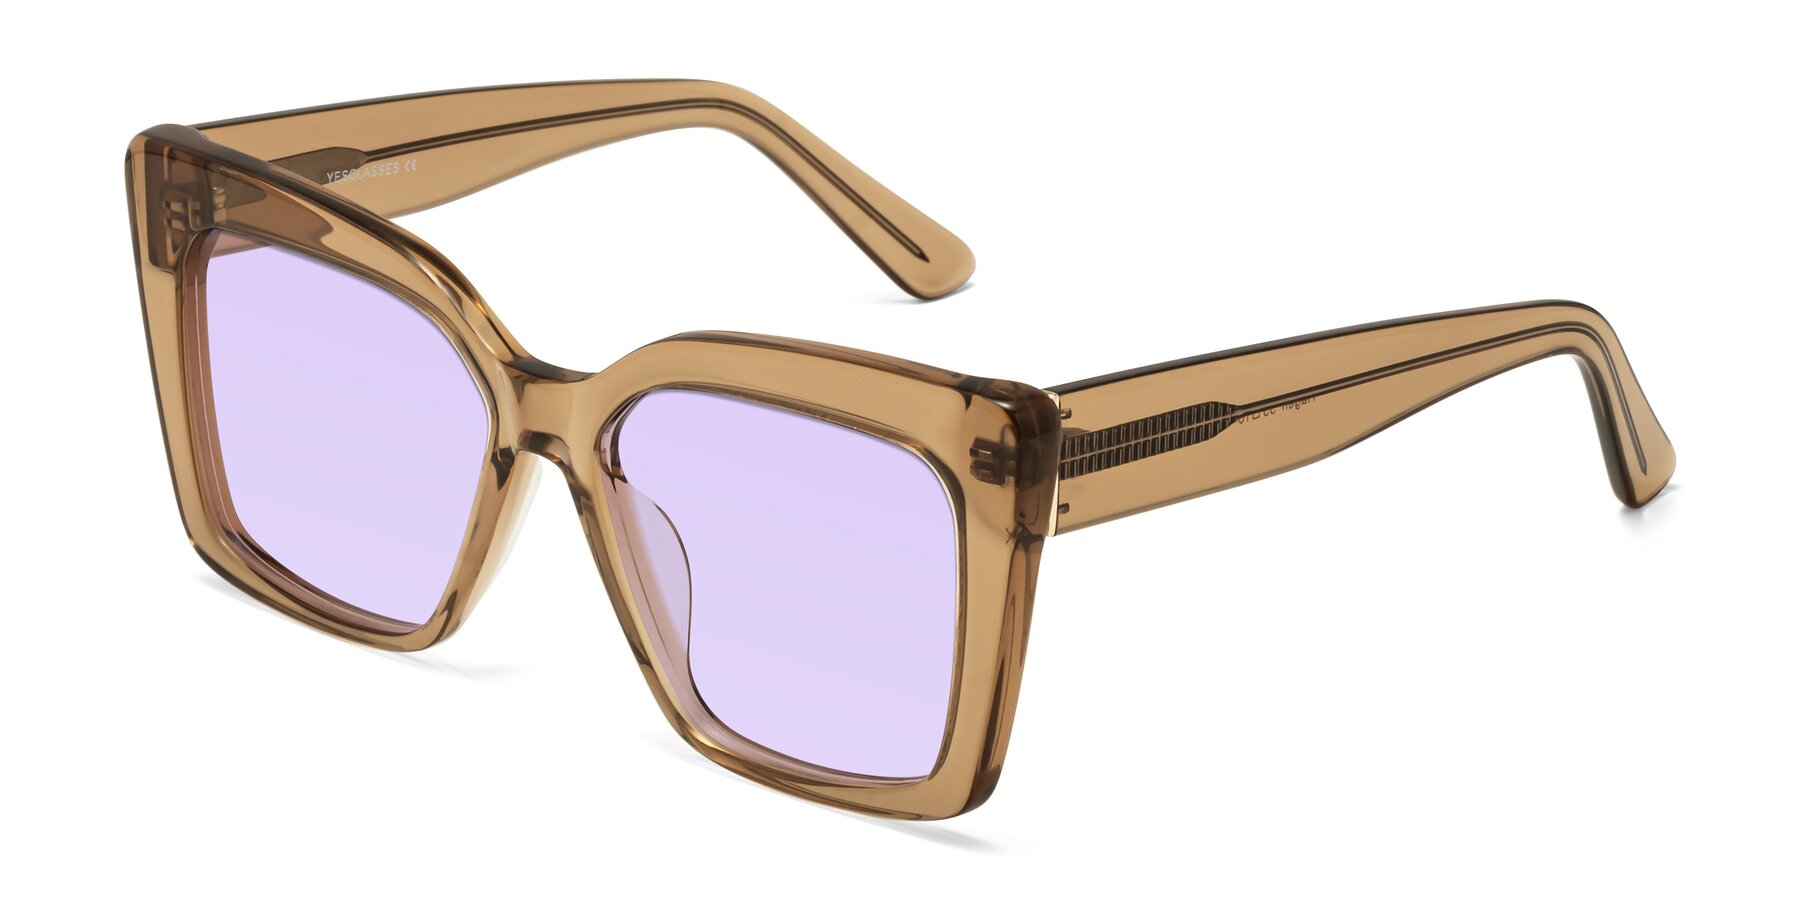 Angle of Hagen in Translucent Brown with Light Purple Tinted Lenses